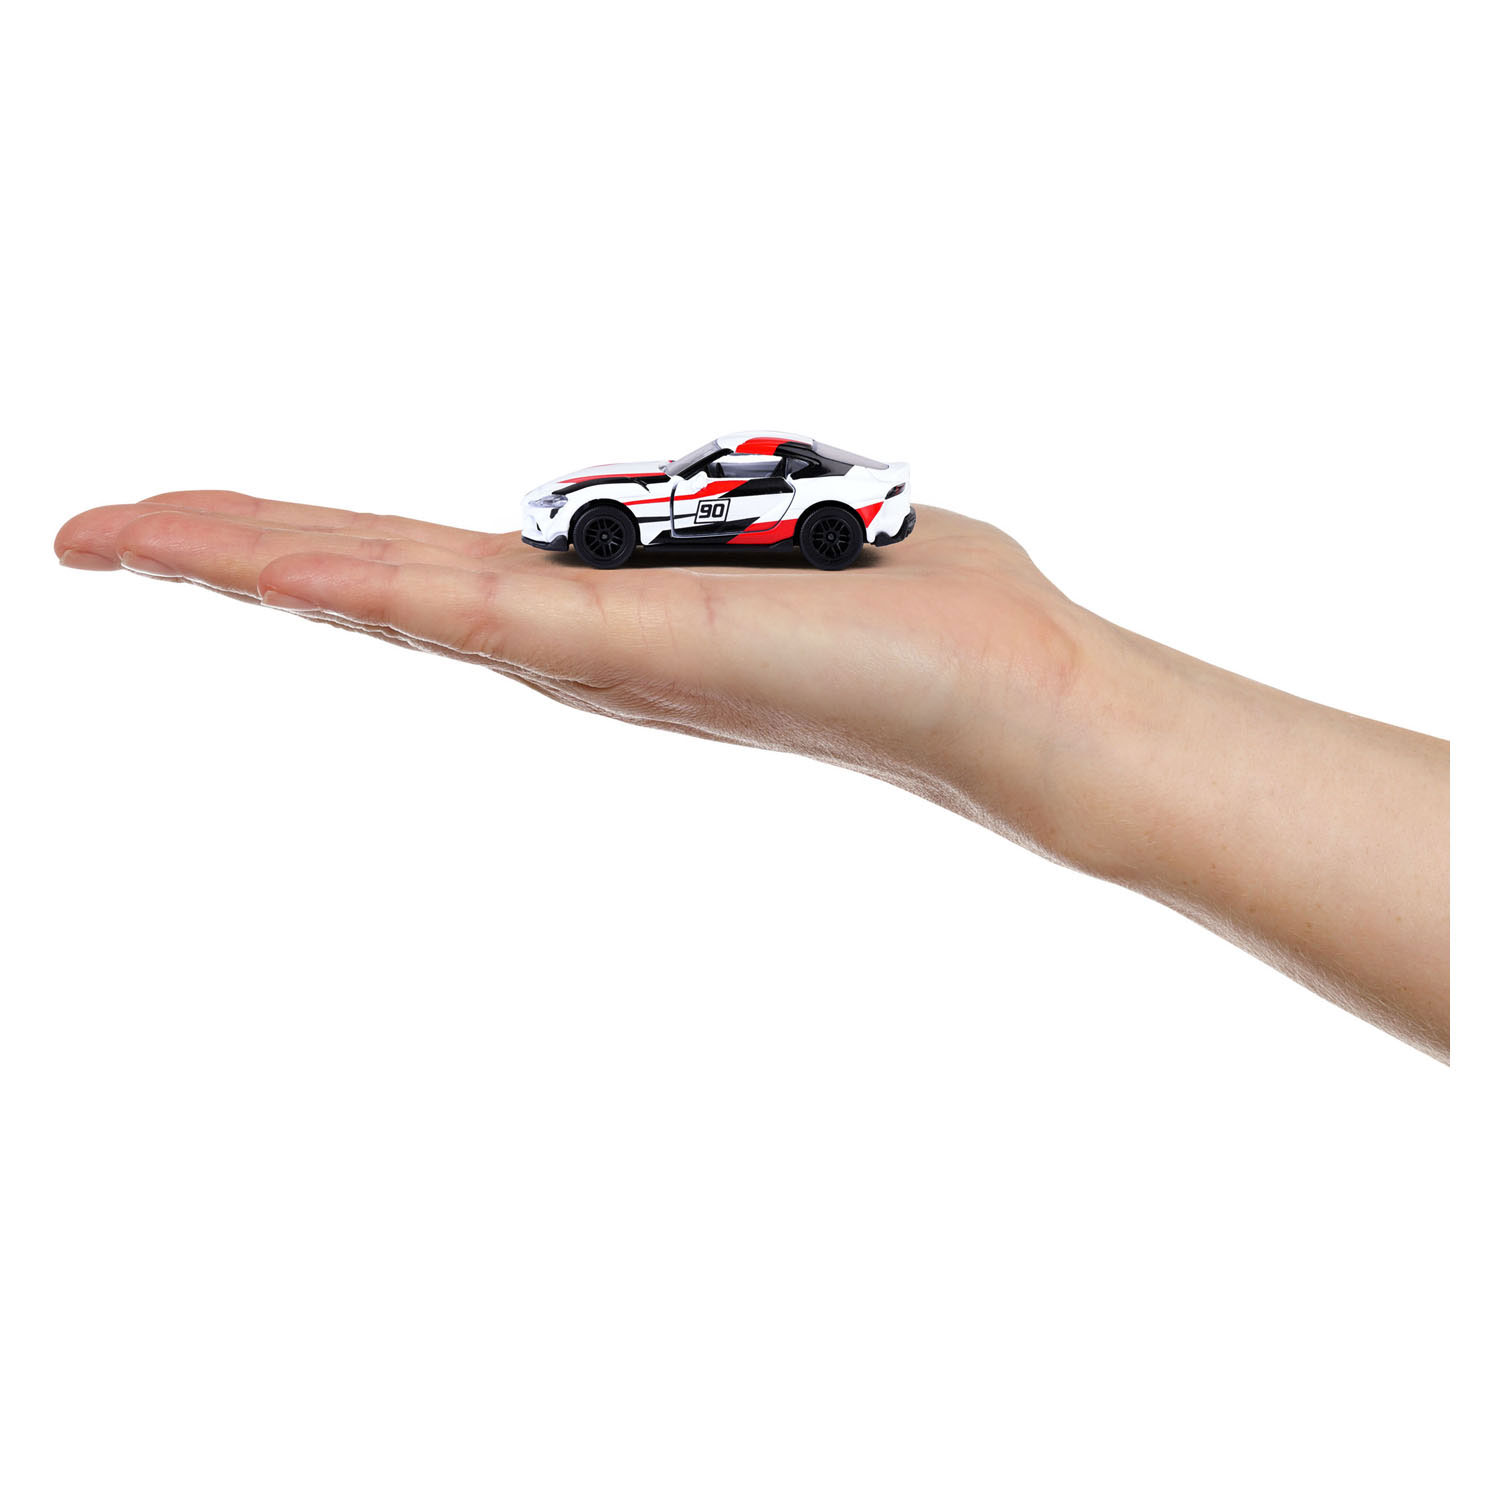 Majorette Toyota Die-Cast Racing Auto's Giftpack, 5st.